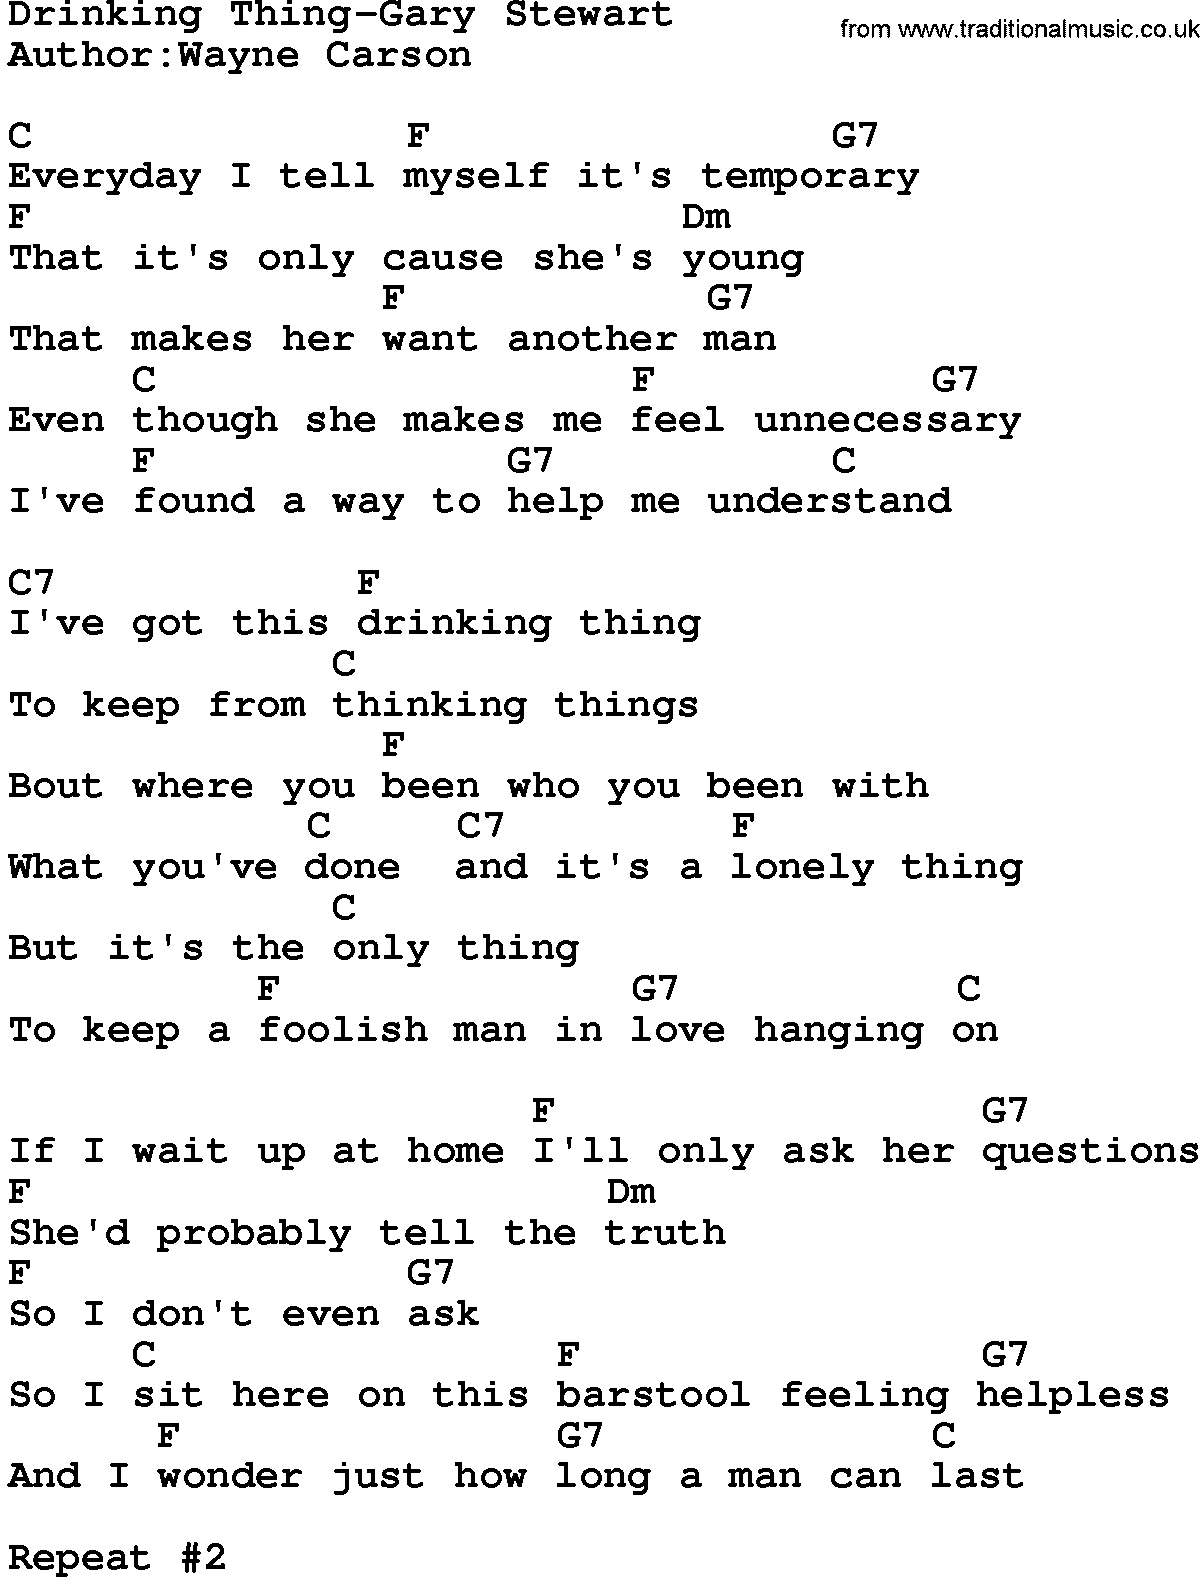 Country music song: Drinking Thing-Gary Stewart lyrics and chords